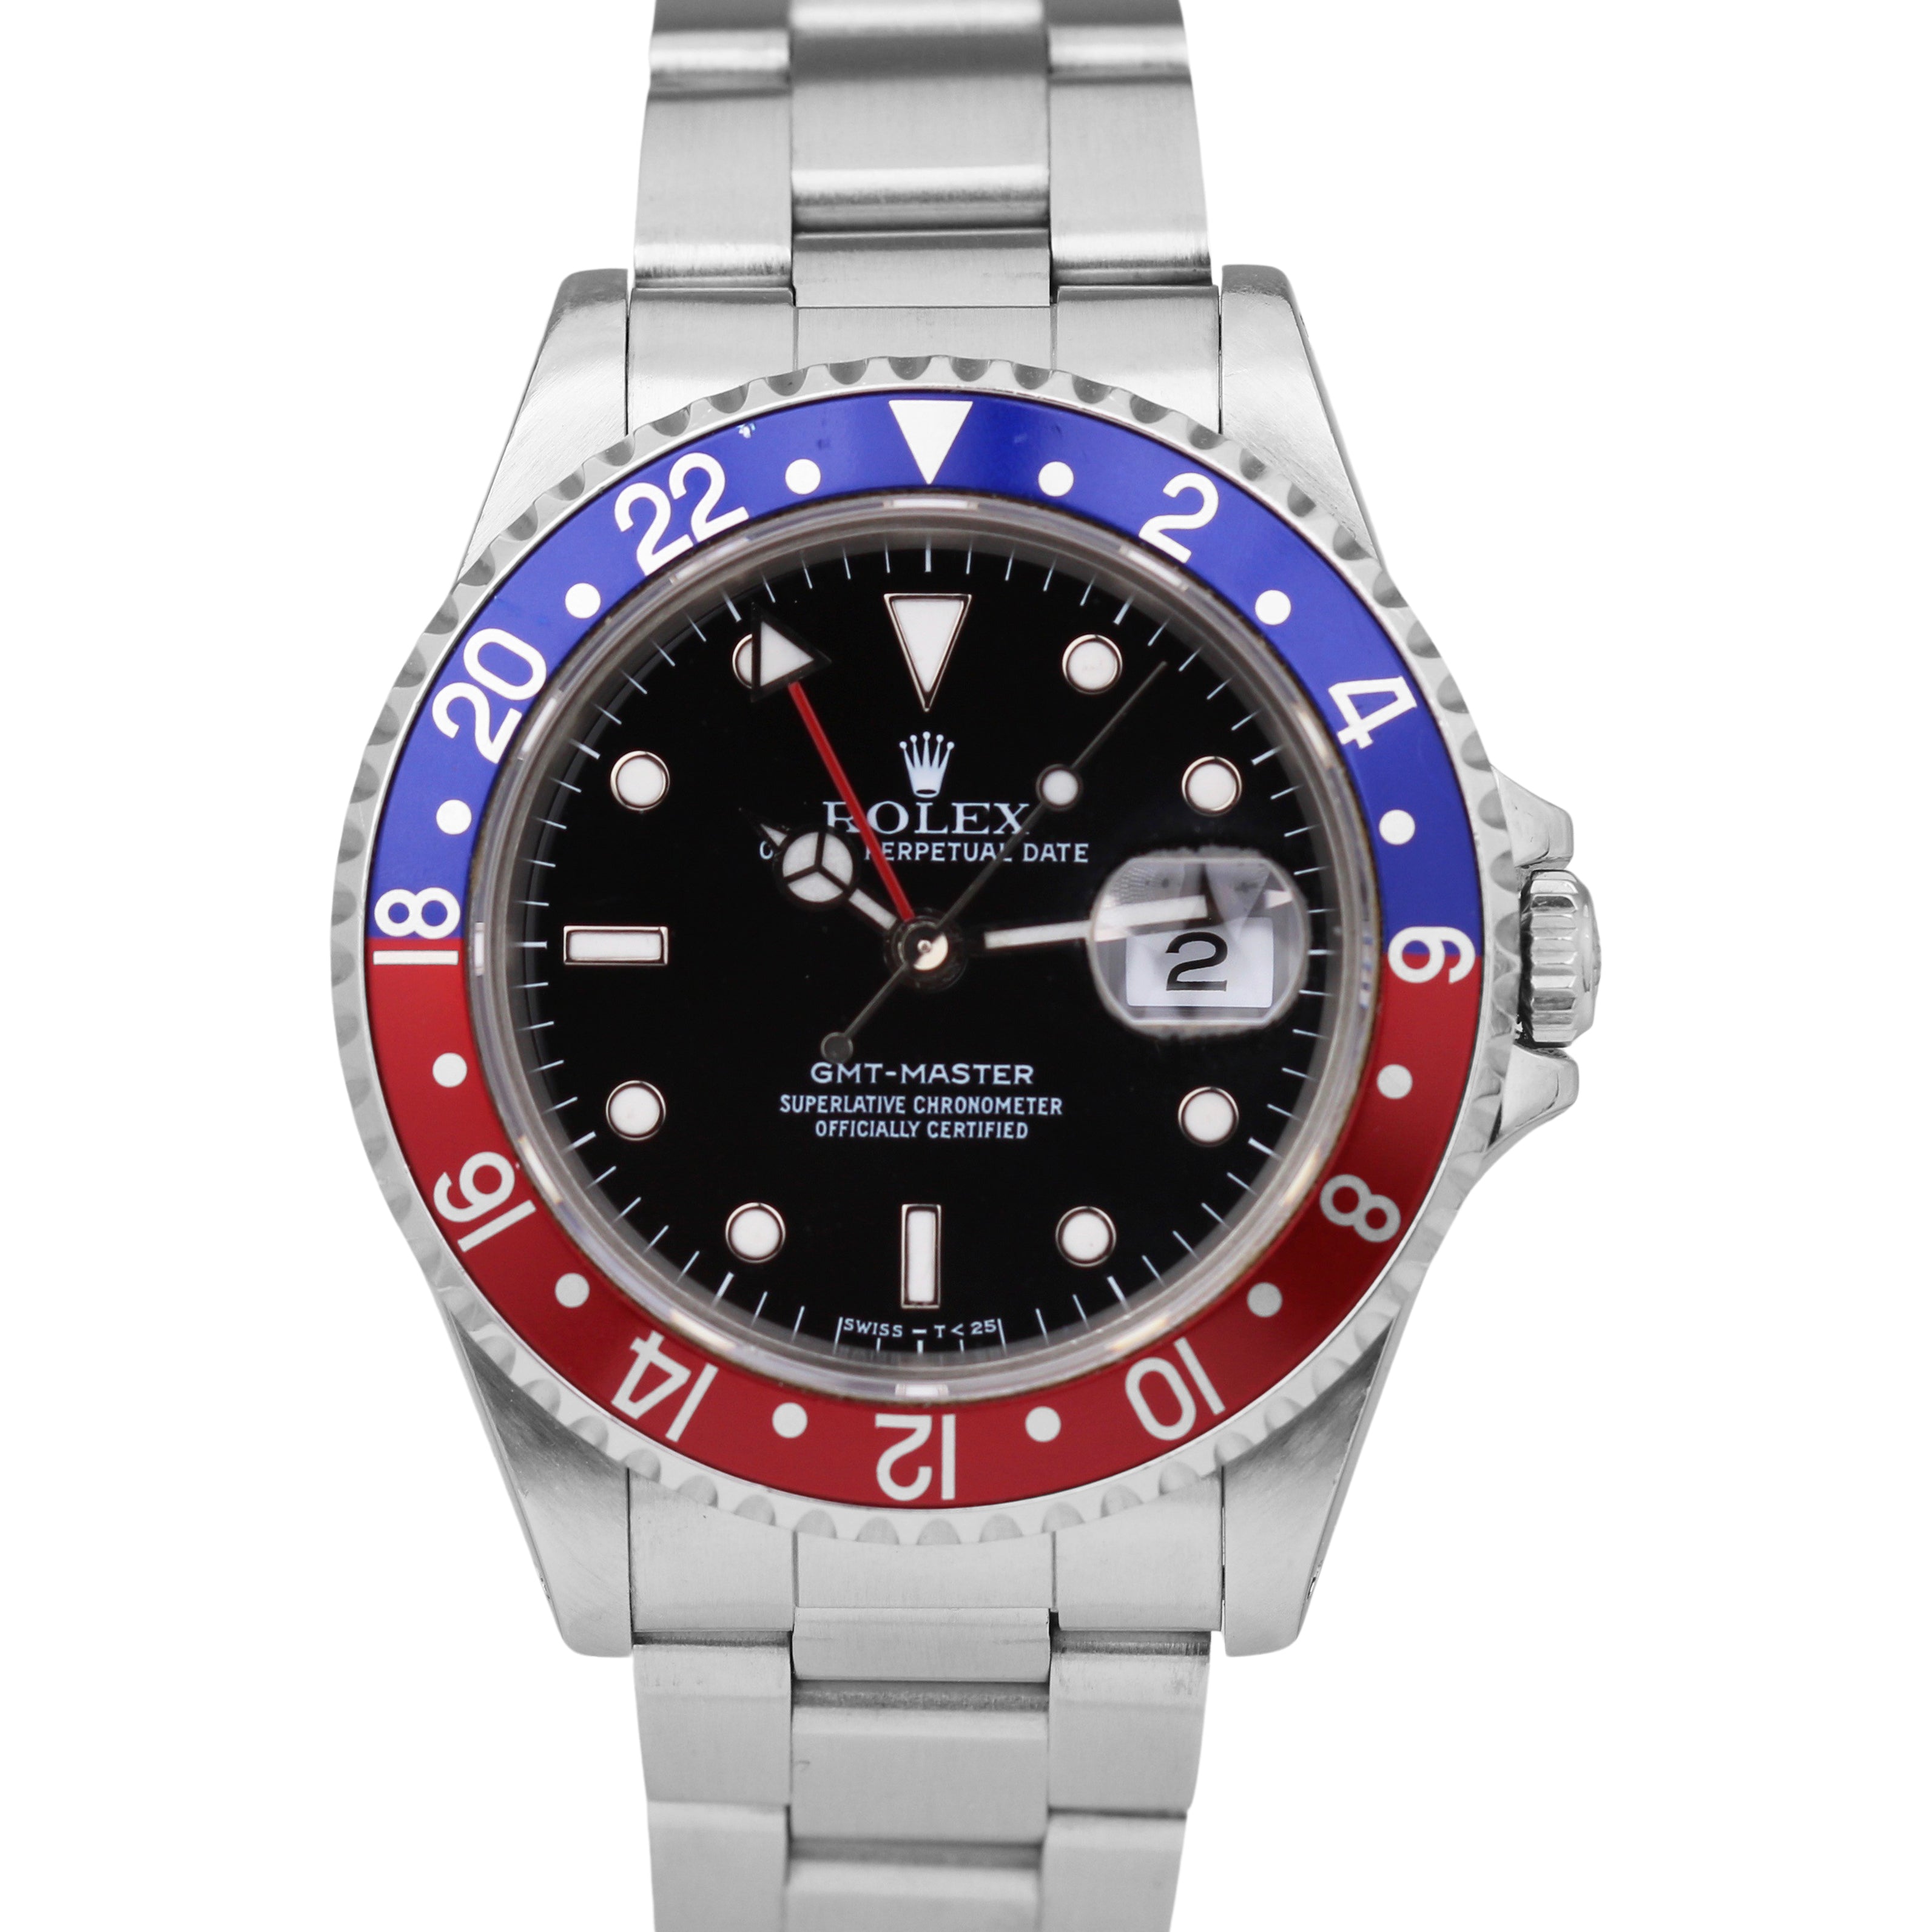 ORIGINAL Rolex GMT-Master 40mm L-Series PEPSI Blue RED 16700 Stainless Watch